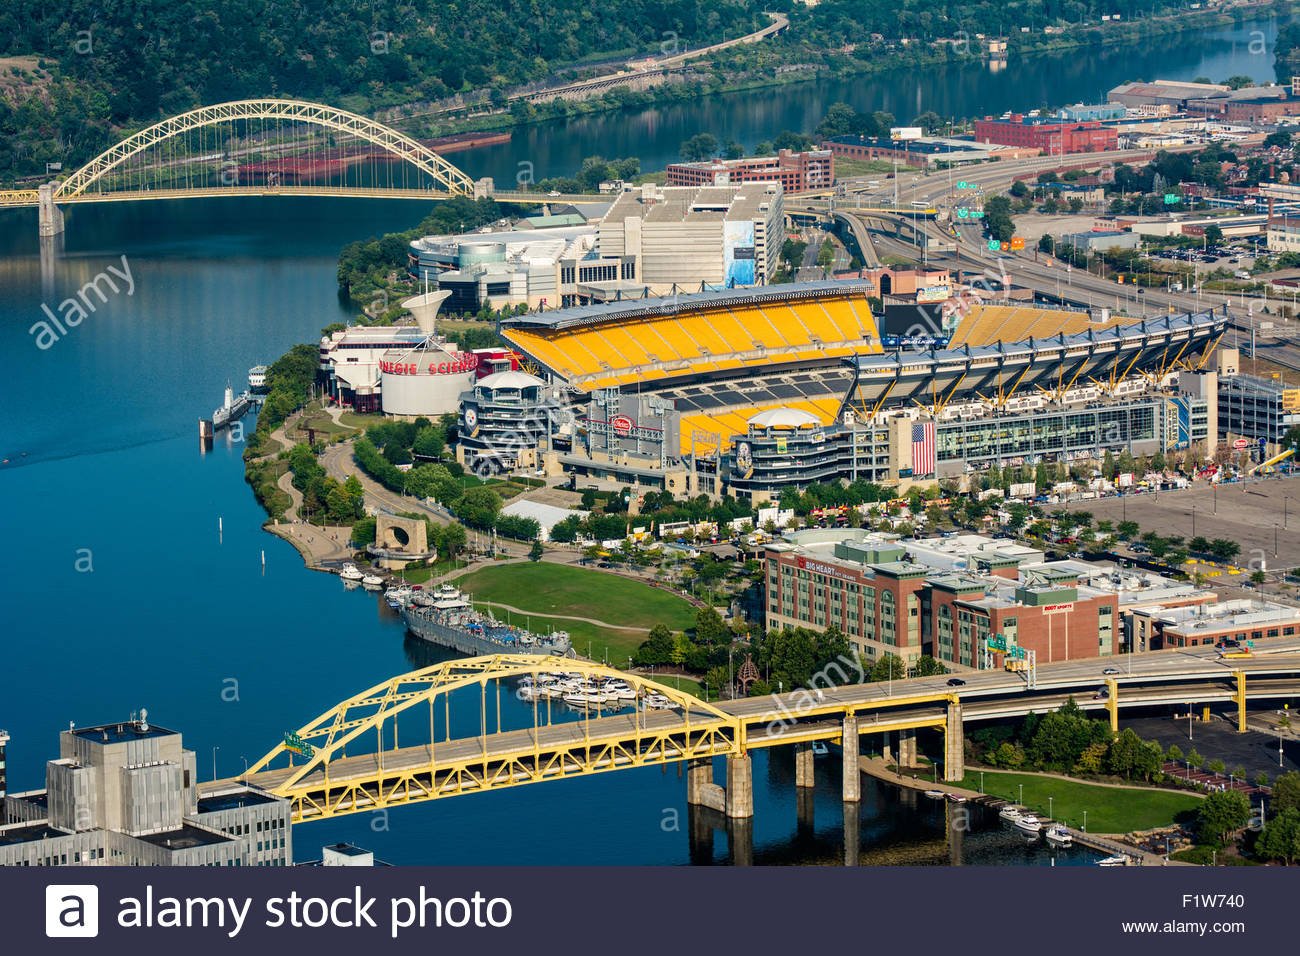 Heinz Field sits between the Ft. Duquesne Bridge in the foreground and the West End Bridge in the background.  